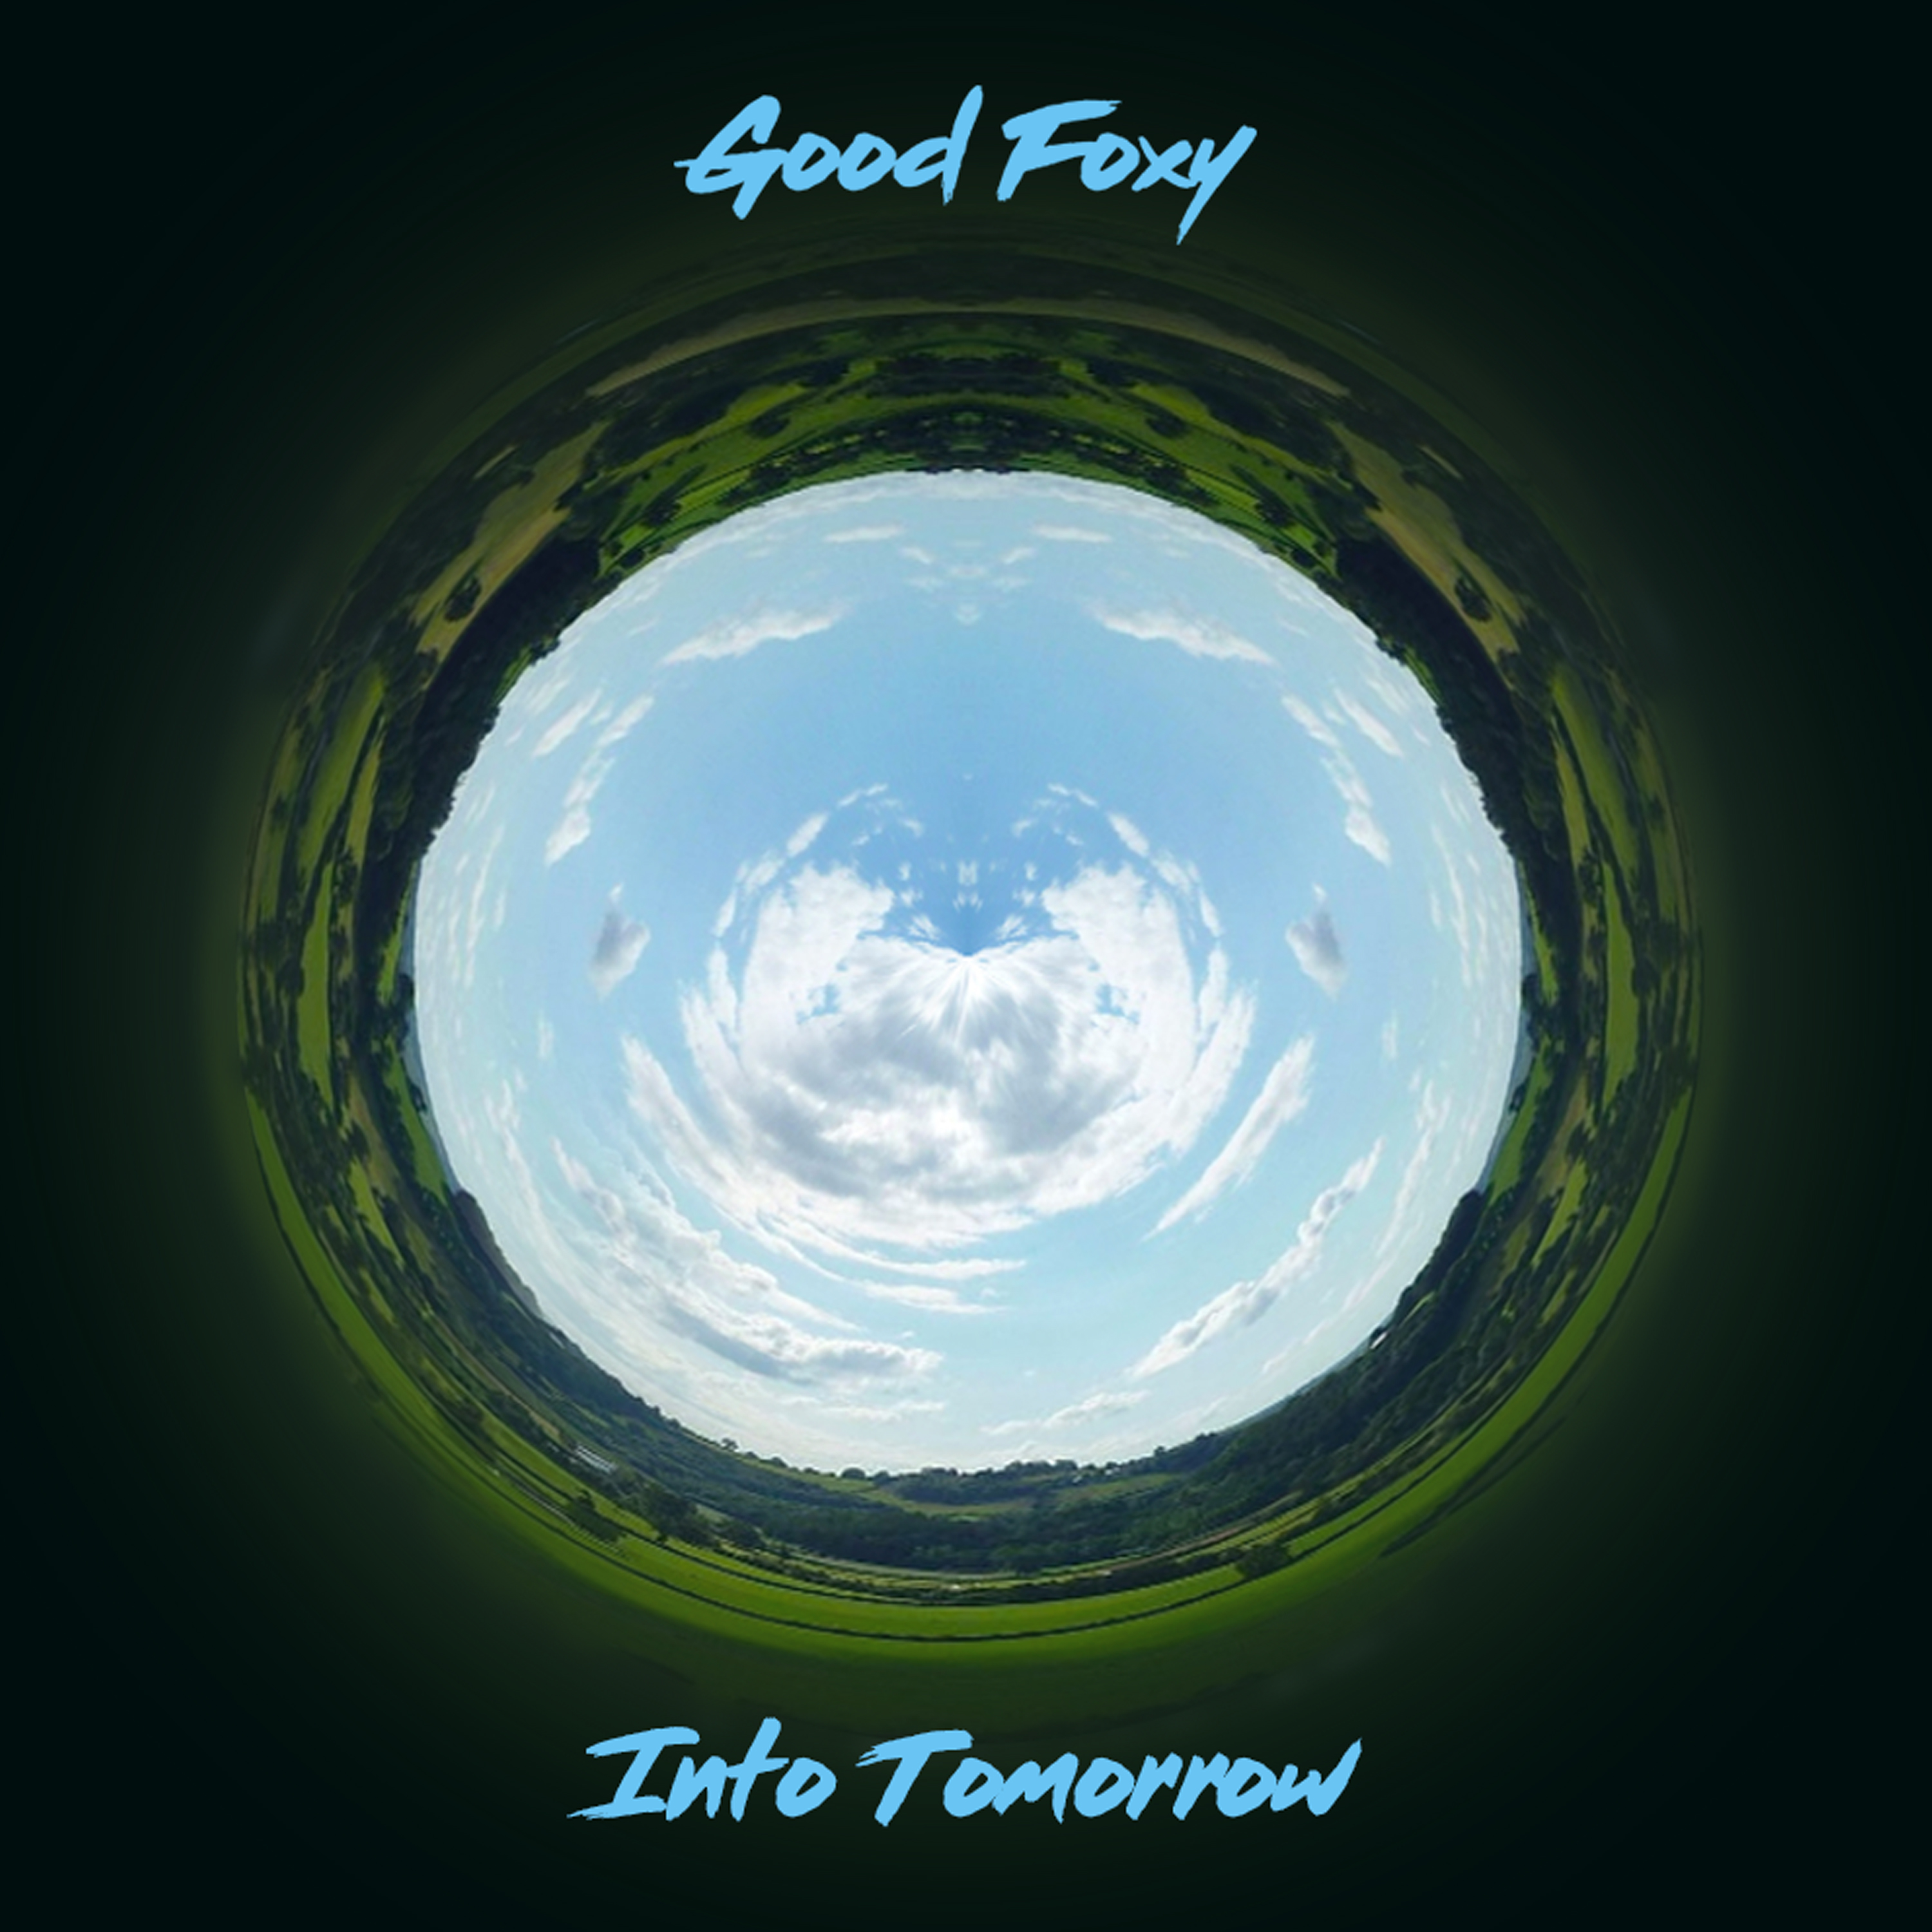  ***PREMIERE*** Listen To Good Foxy’s Brand New Track – Into Tomorrow **HERE**